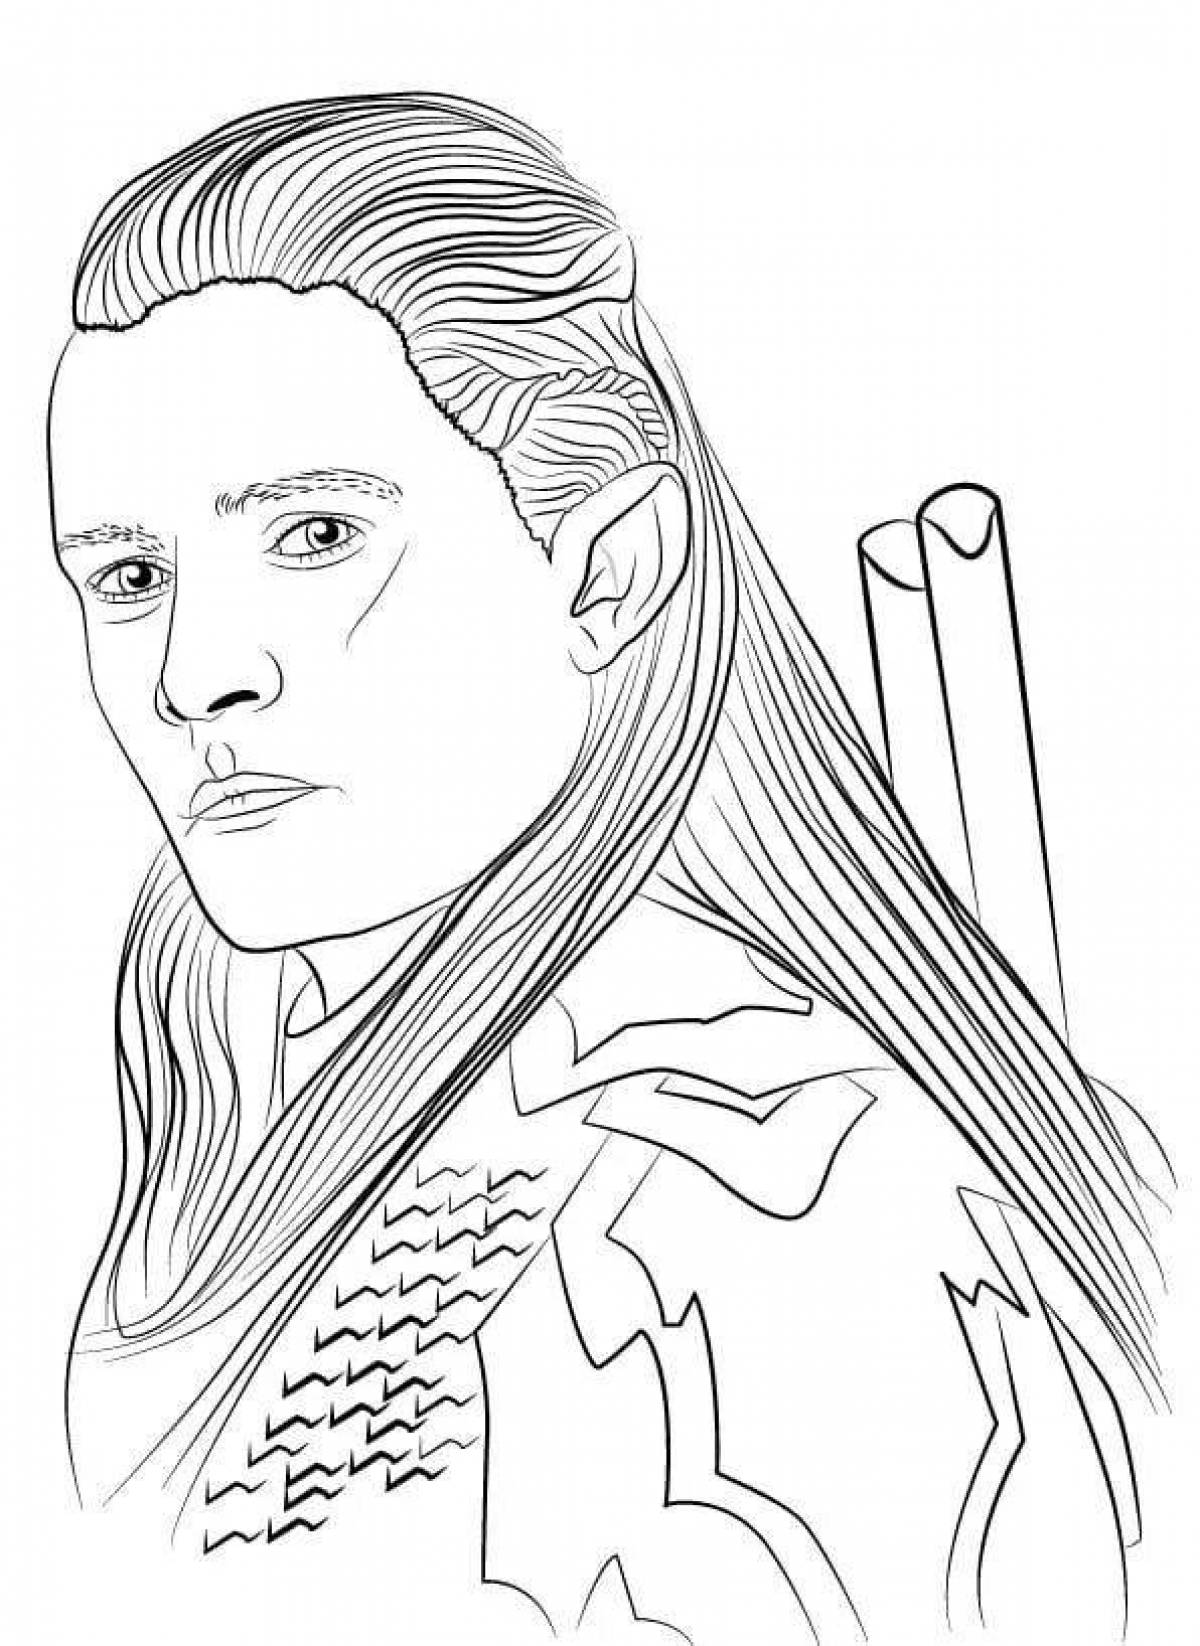 The Magnificent Lord of the Rings coloring page